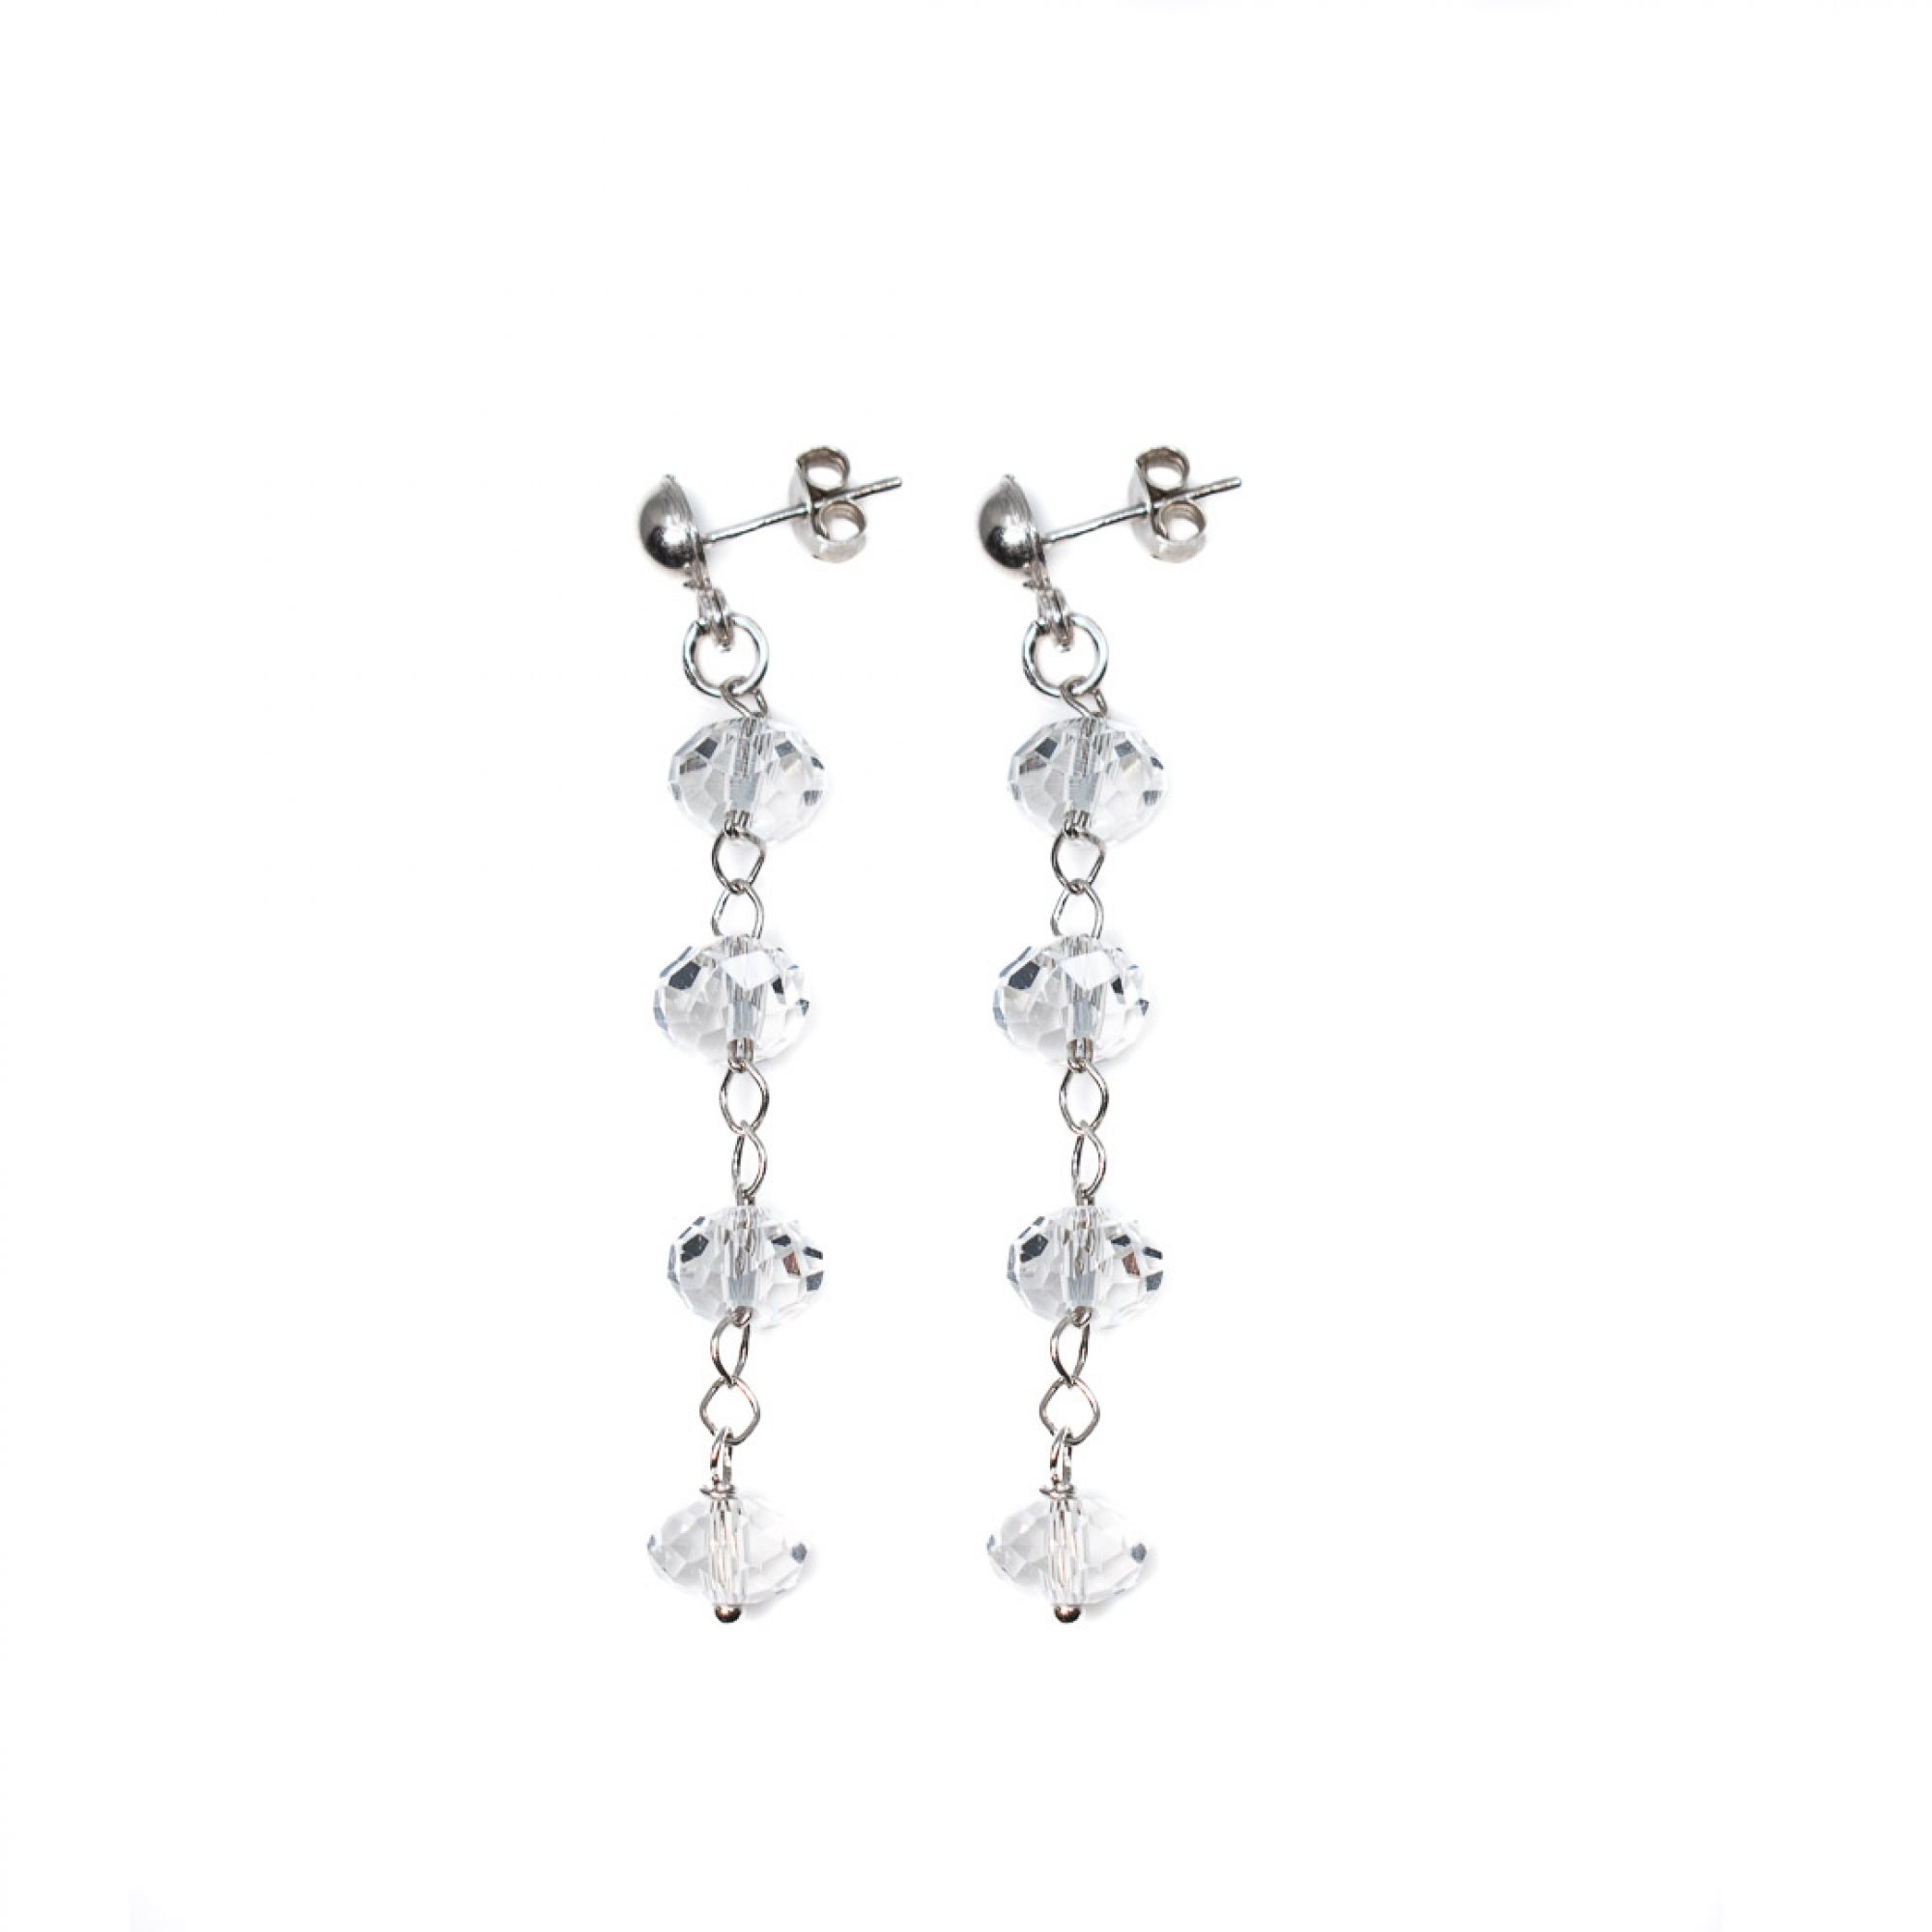 Chain earrings with natural stones